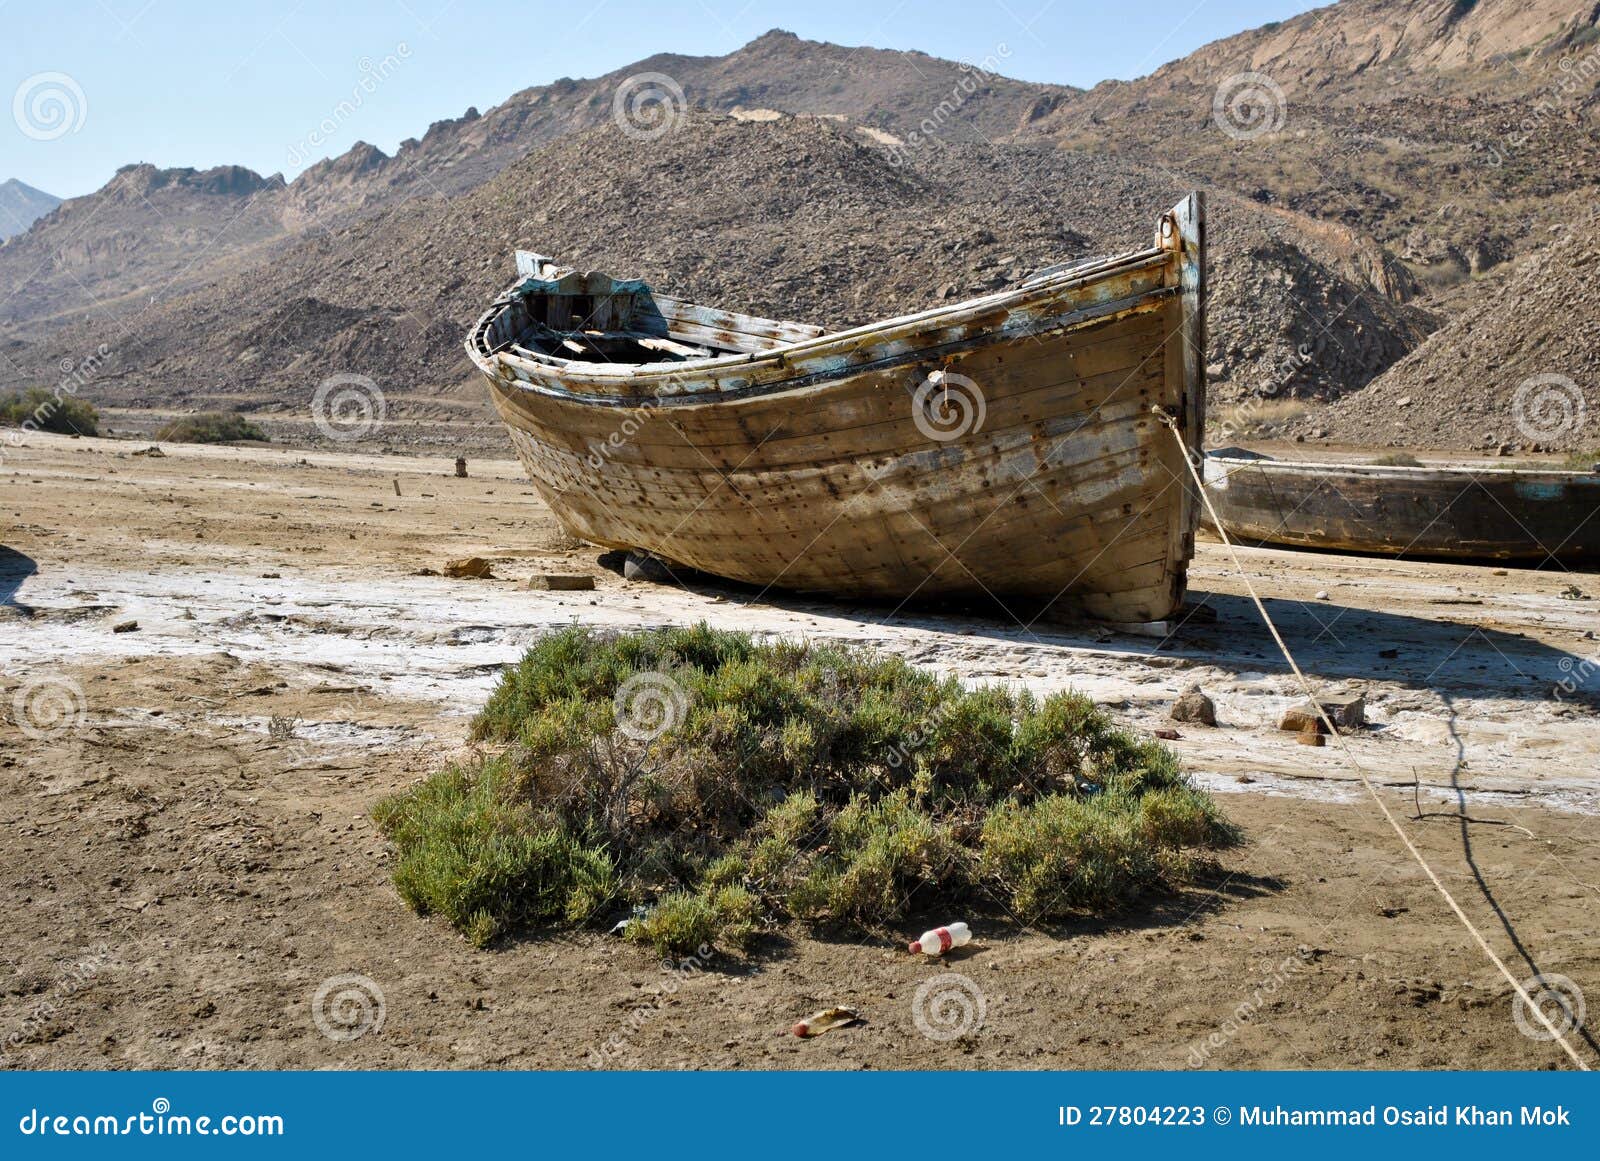 Old Rowing Boat. Stock Photos - Image: 27804223